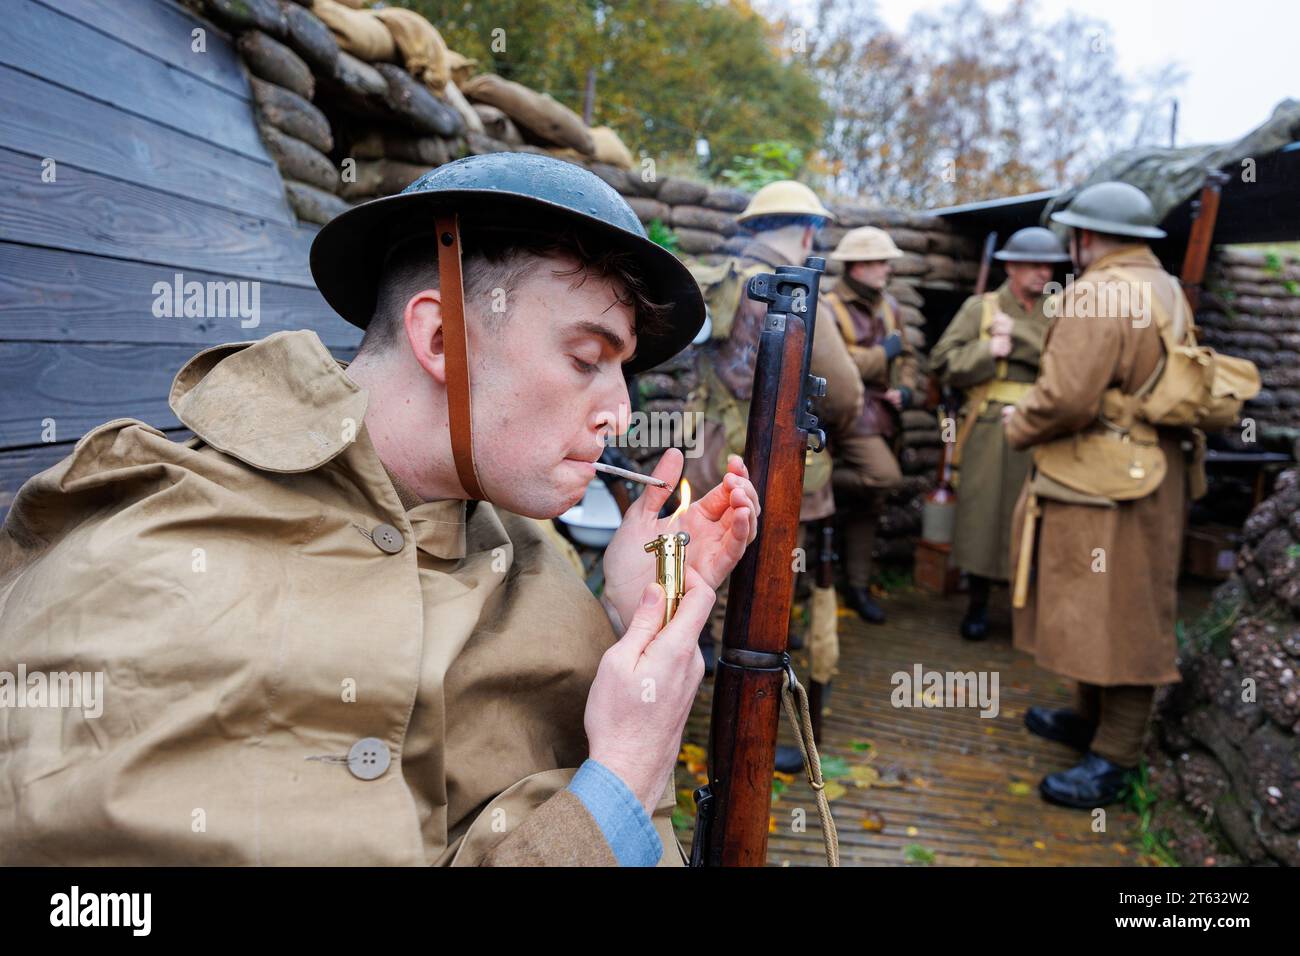 The Staffordshire Regiment Museum have built Trenches modelled on the real ones used in World War to give visitors an experience of what life was like for soldiers in the trenches. The museum holds events using reenactors to create the mood and bring to life history from the period. Pictured, Isaac Marlow (27)  from the Birmingham Pals troop lights a roll up cigarette in one of the trenches using a french lighter from the period. Stock Photo